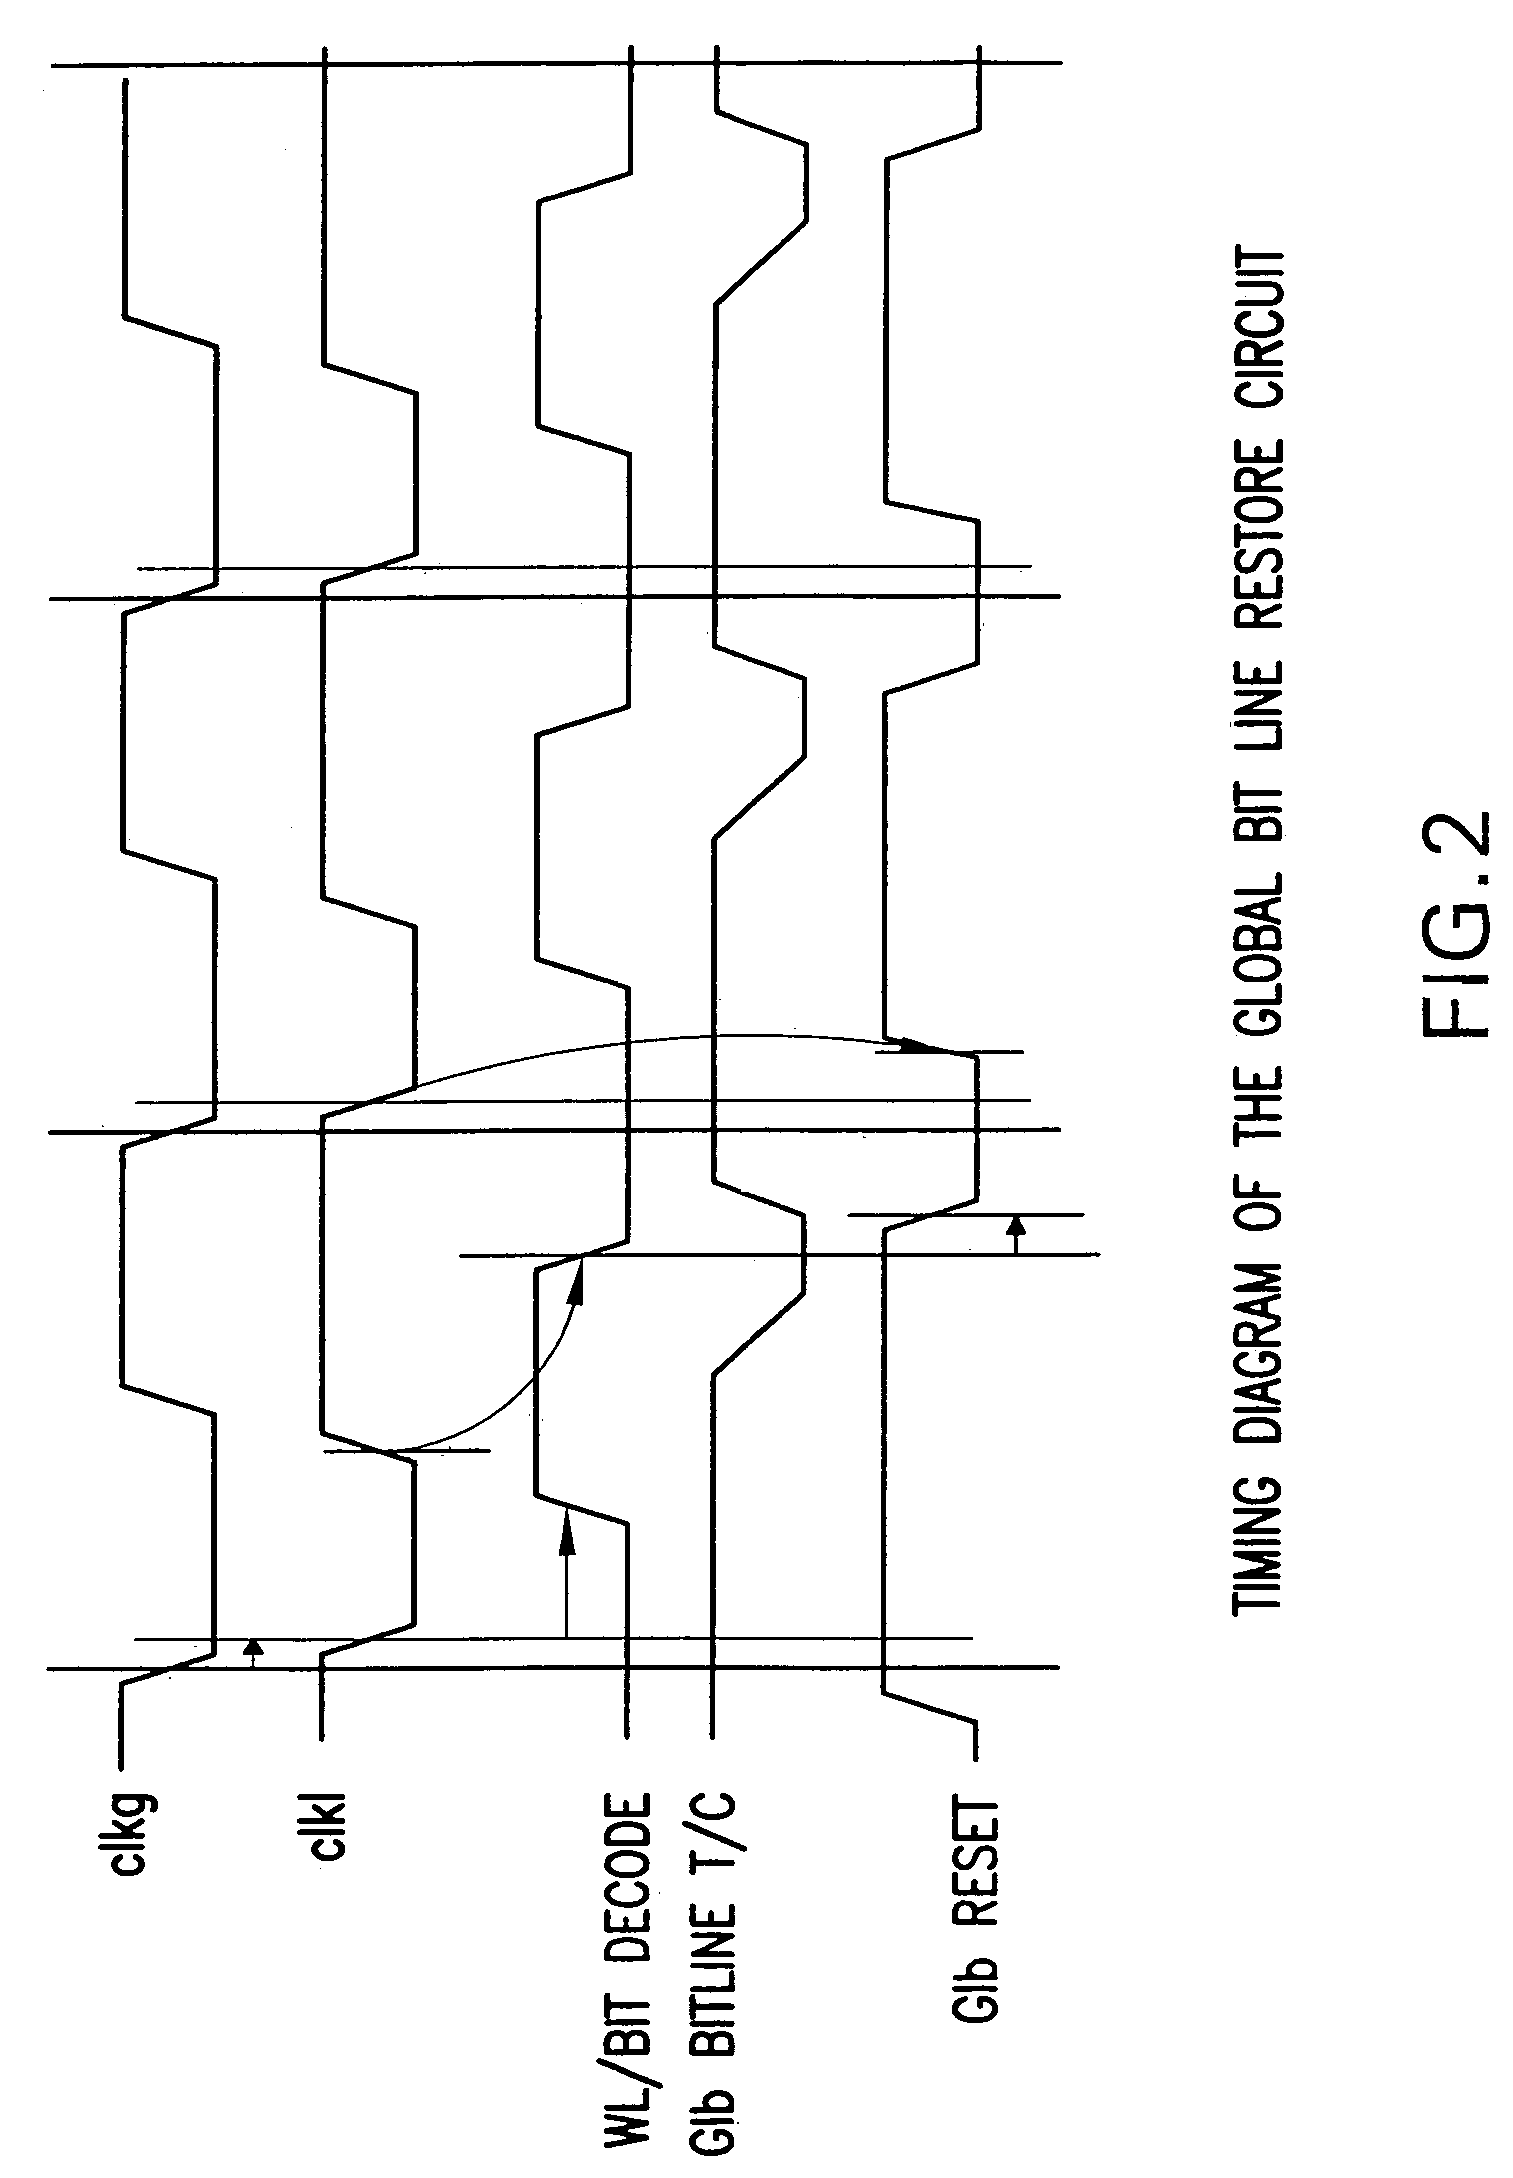 Global bit line restore timing scheme and circuit